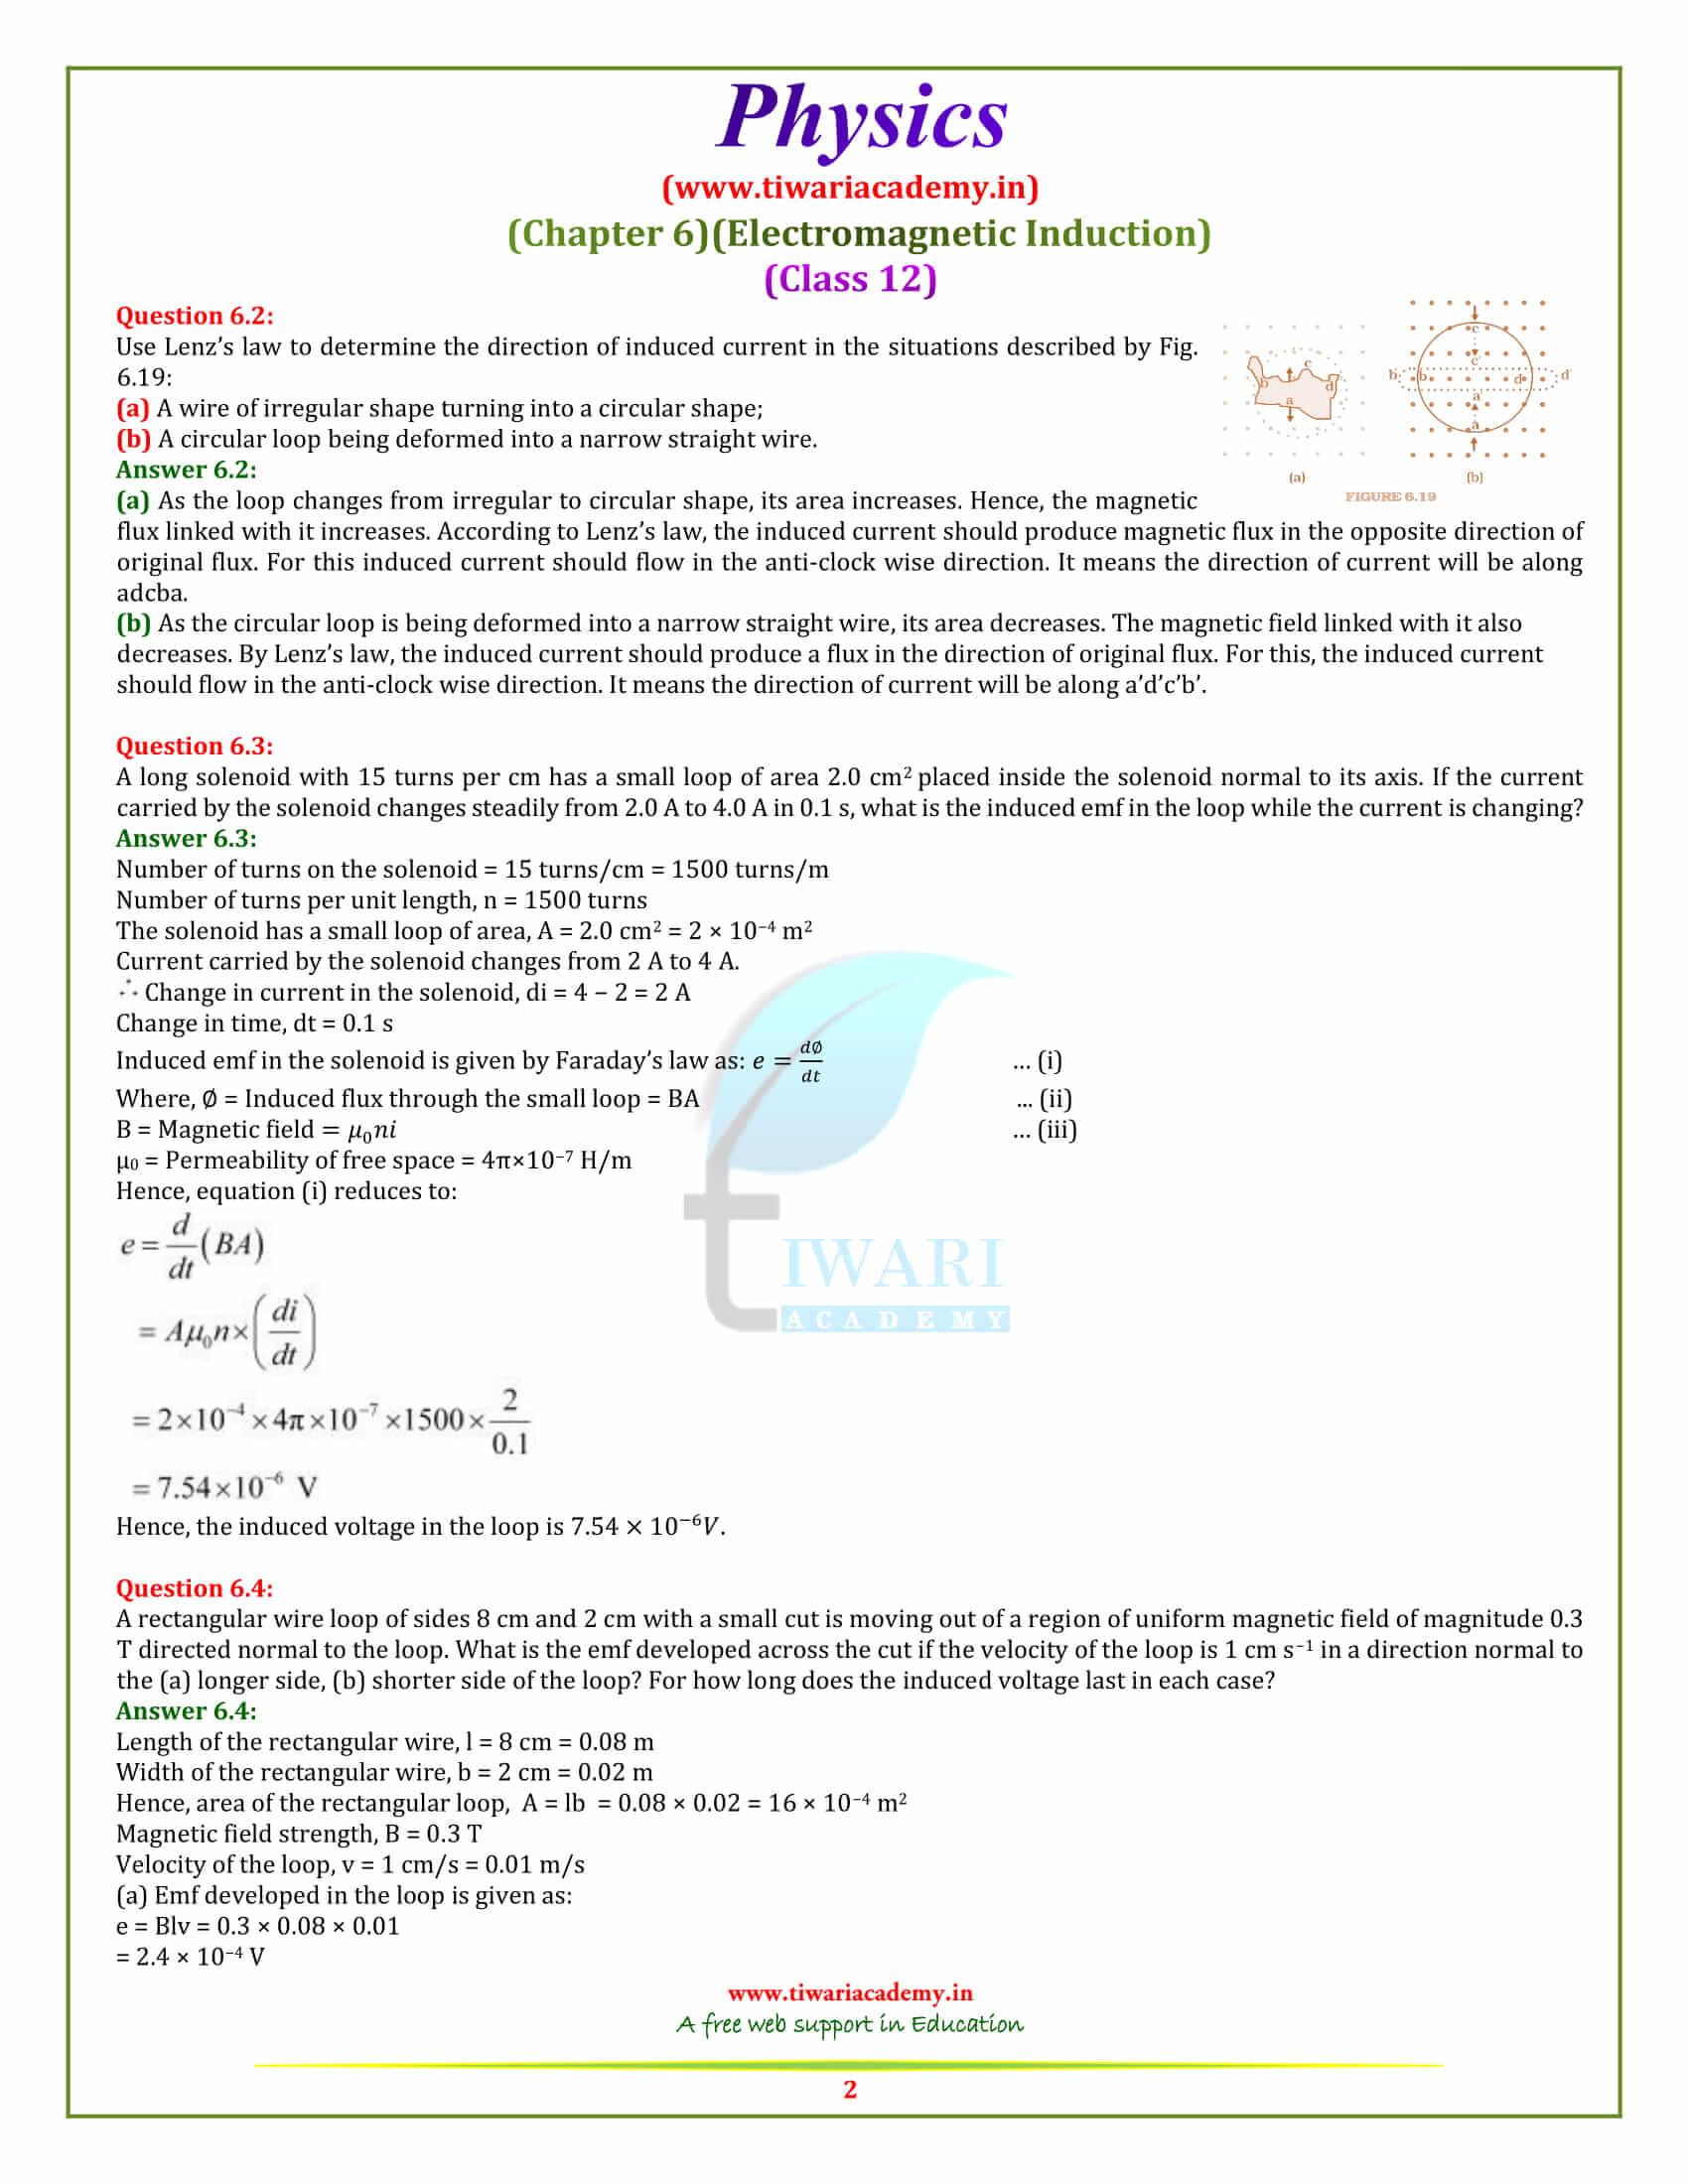 NCERT Solutions for Class 12 Physics Chapter 6 Electromagnetic Induction in pdf form